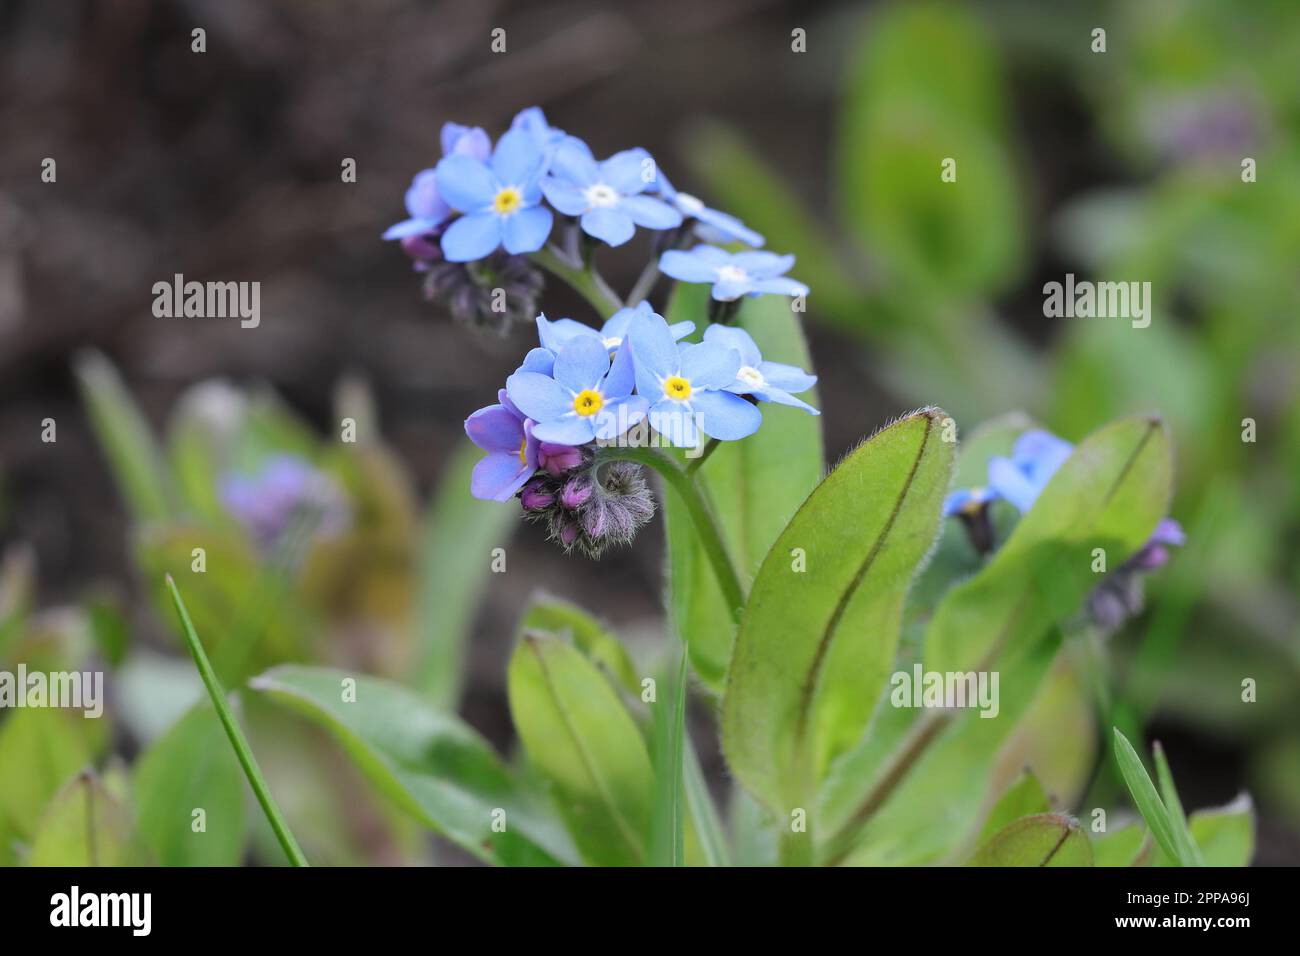 Close-up of pretty blue myosotis flowers, side view, blurry background Stock Photo